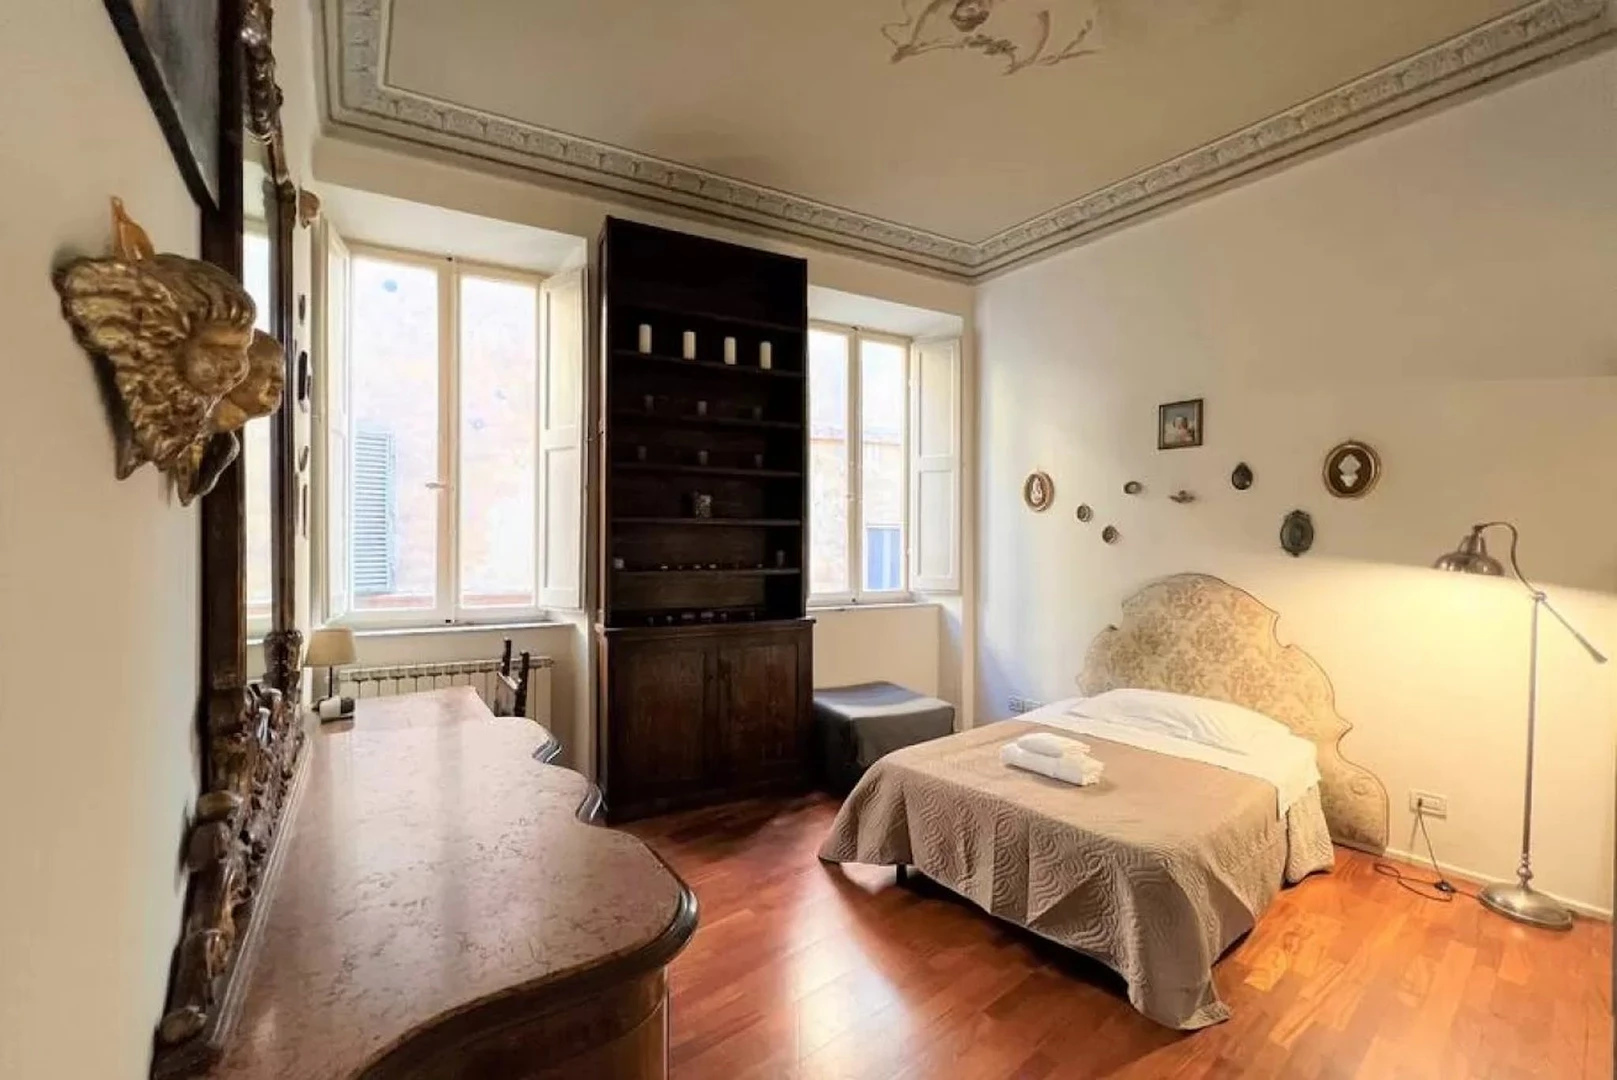 Accommodation in the centre of Siena